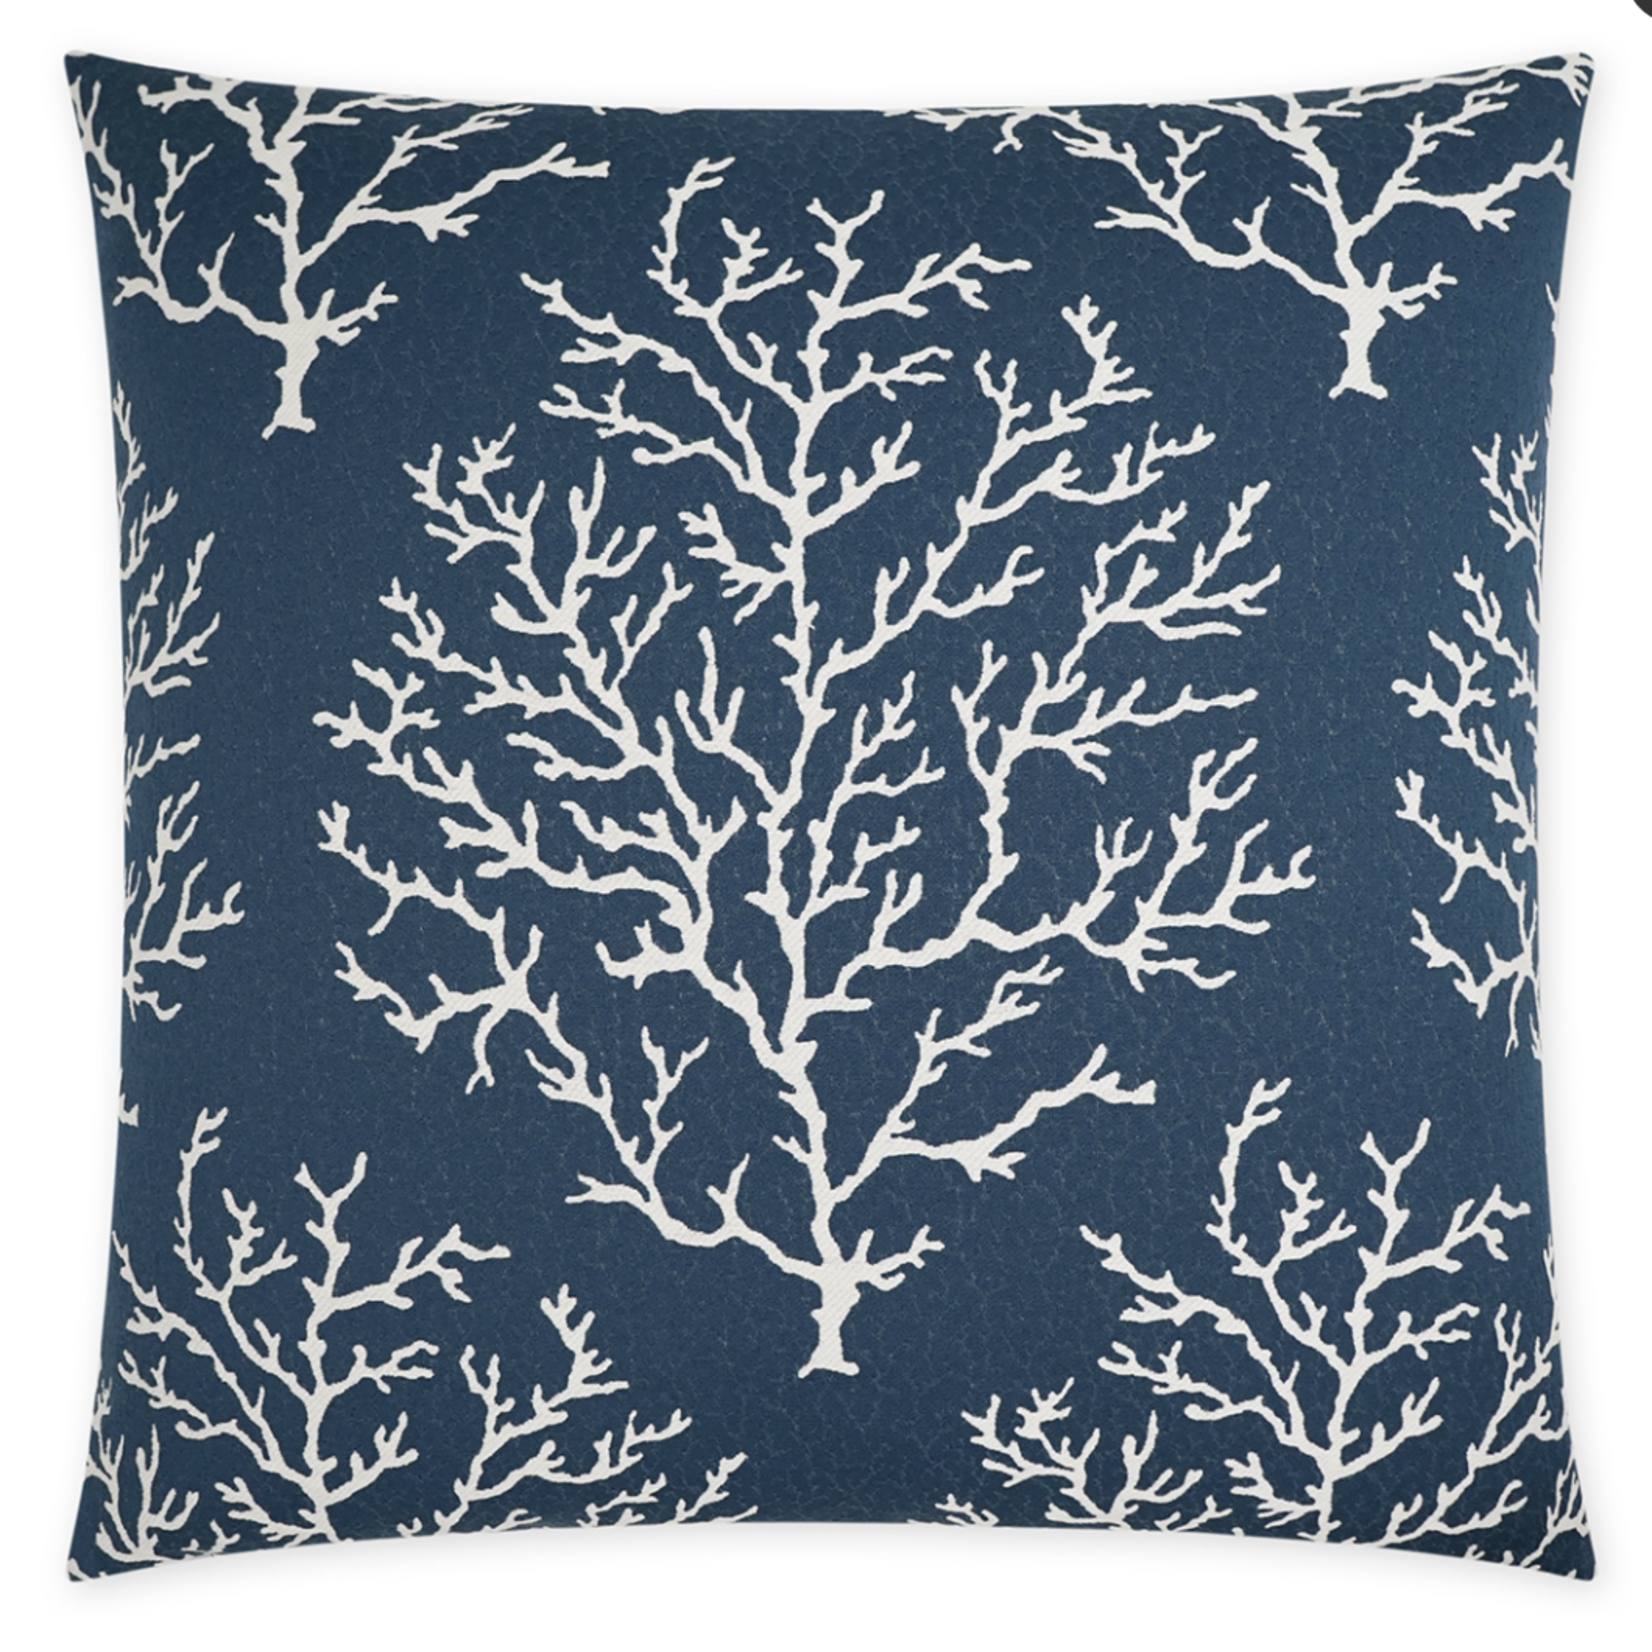 Outside The Box 24x24 Coral Craze Feather Down Pillow In Navy